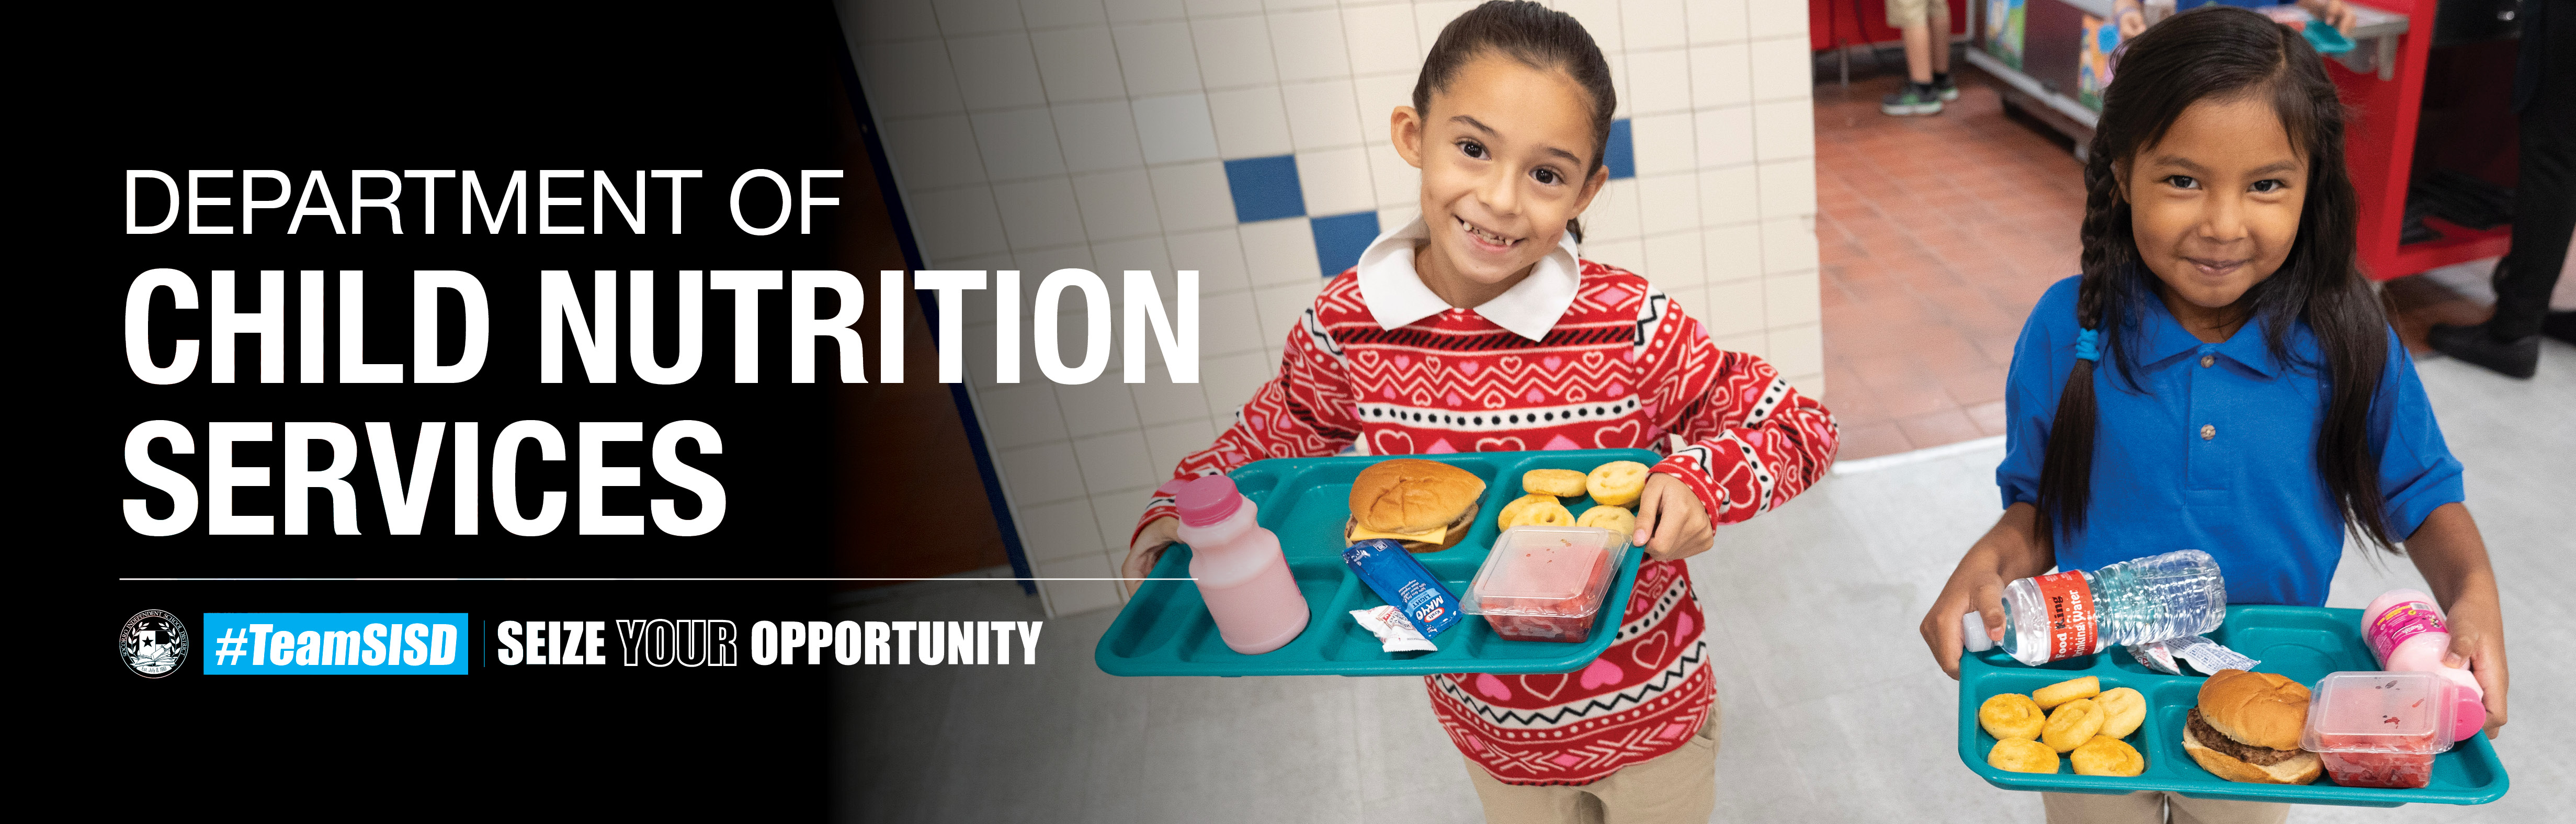 Department of Child Nutrition Services web header